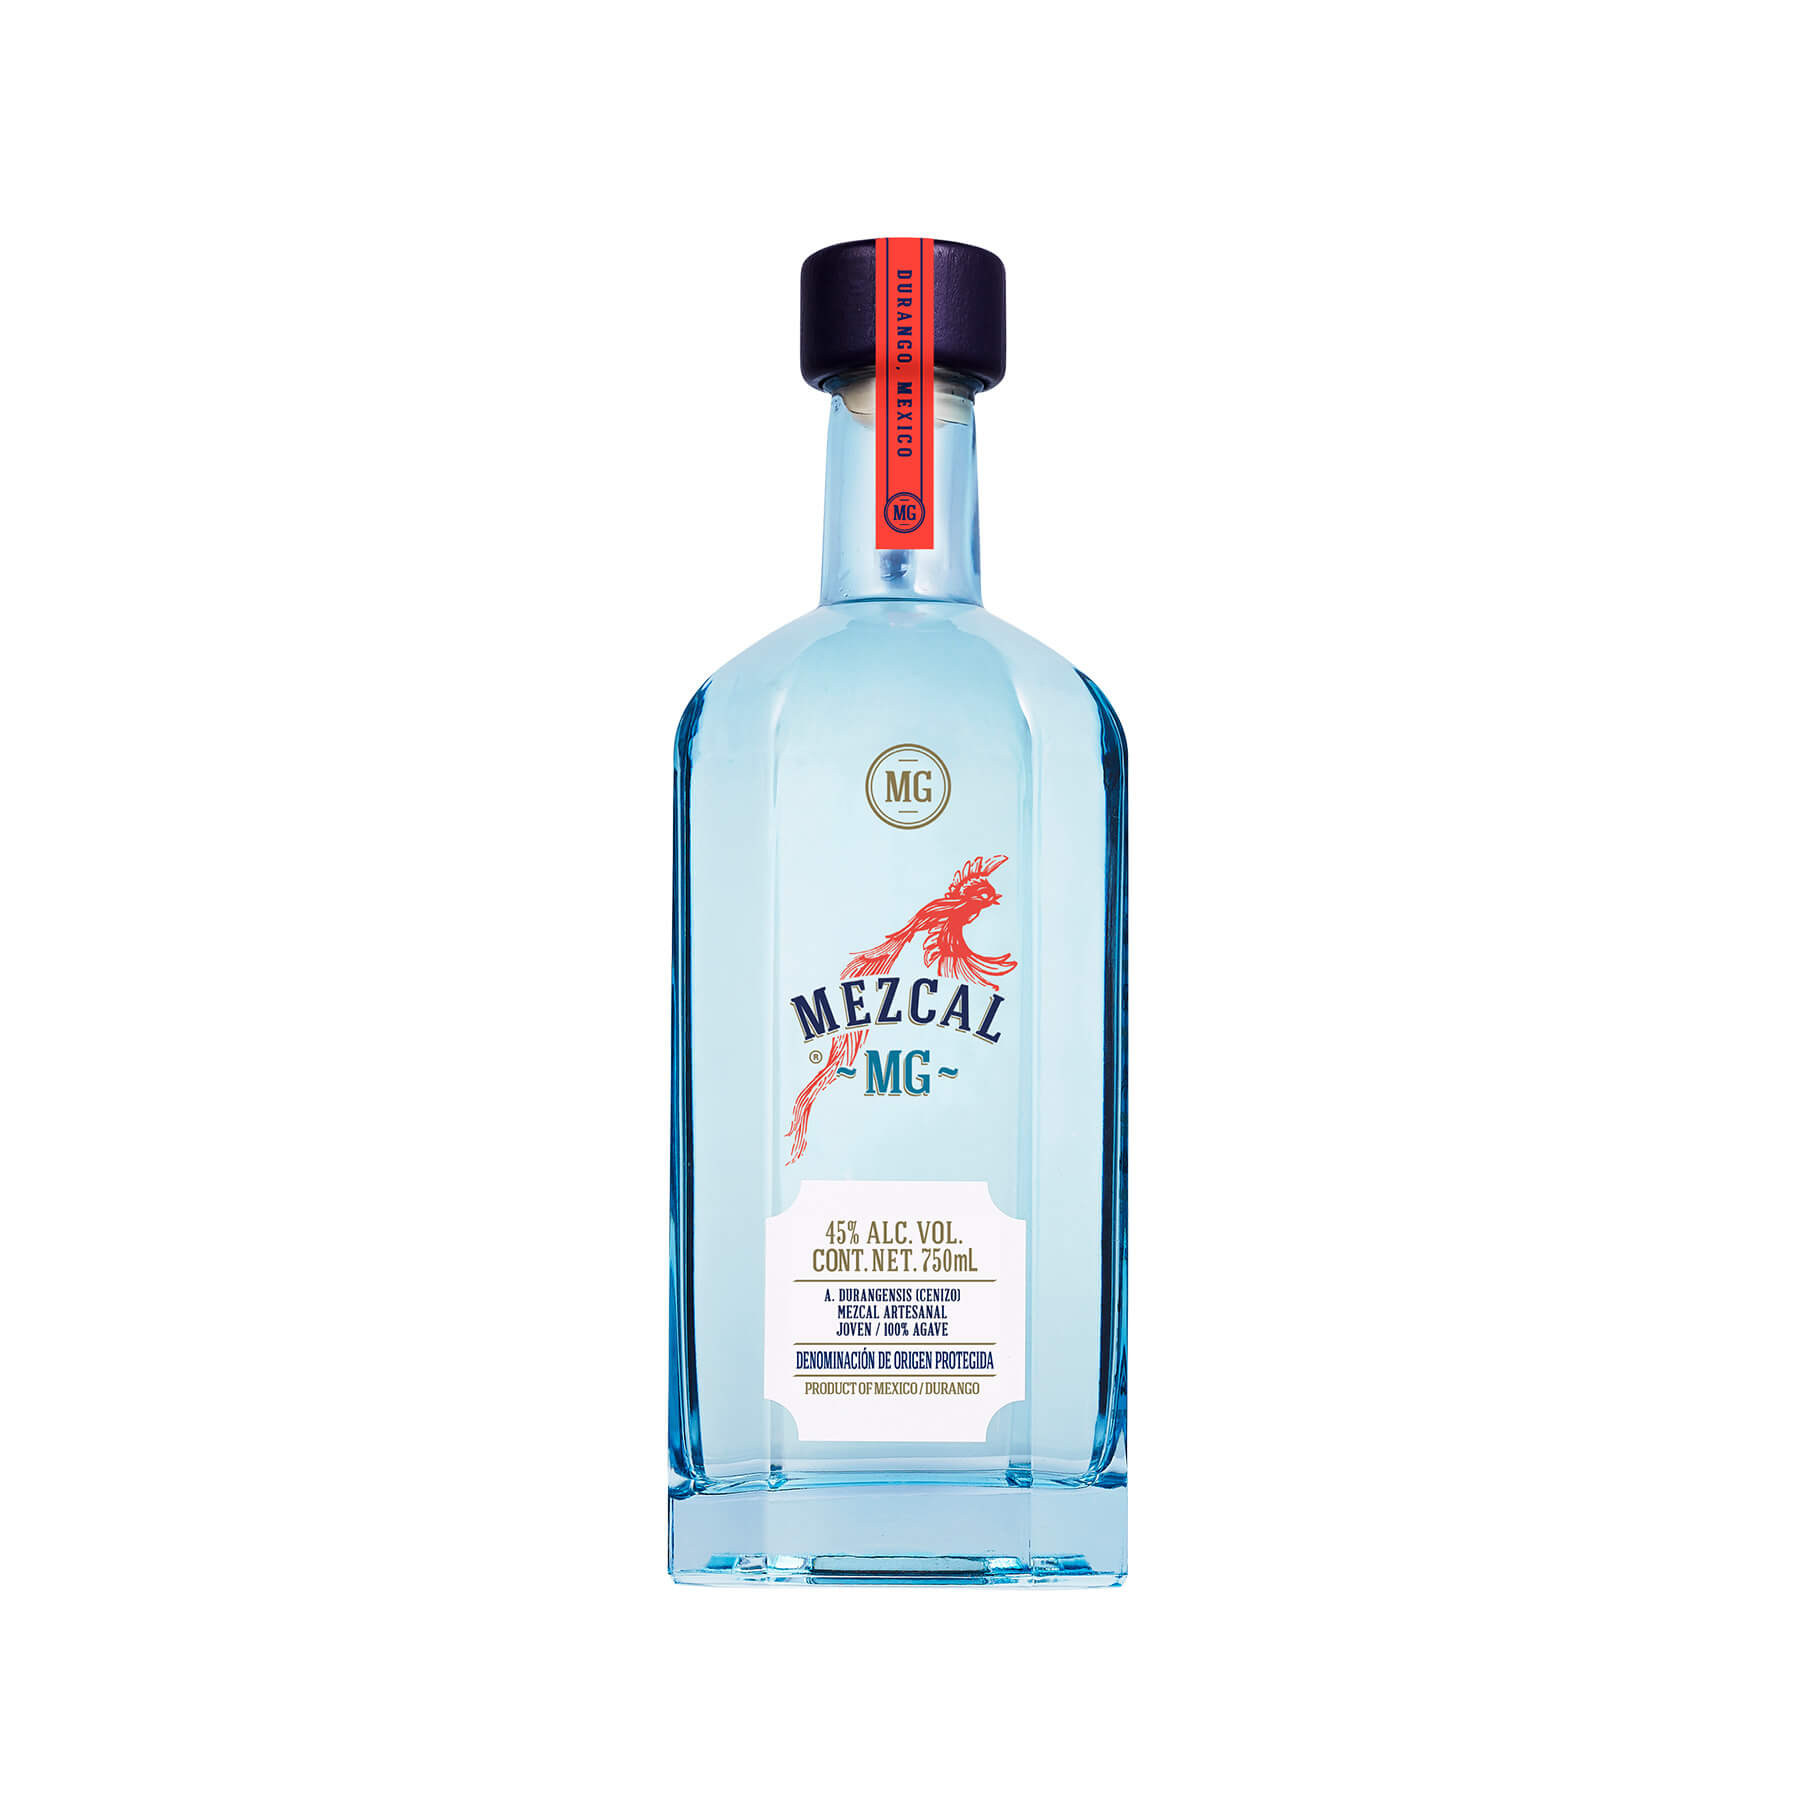 Mezcal Gin is a small-batch handcrafted spirit that brings together The complex body and flavours of artisanal Mezcal with the freshness and perfume of the Gin.